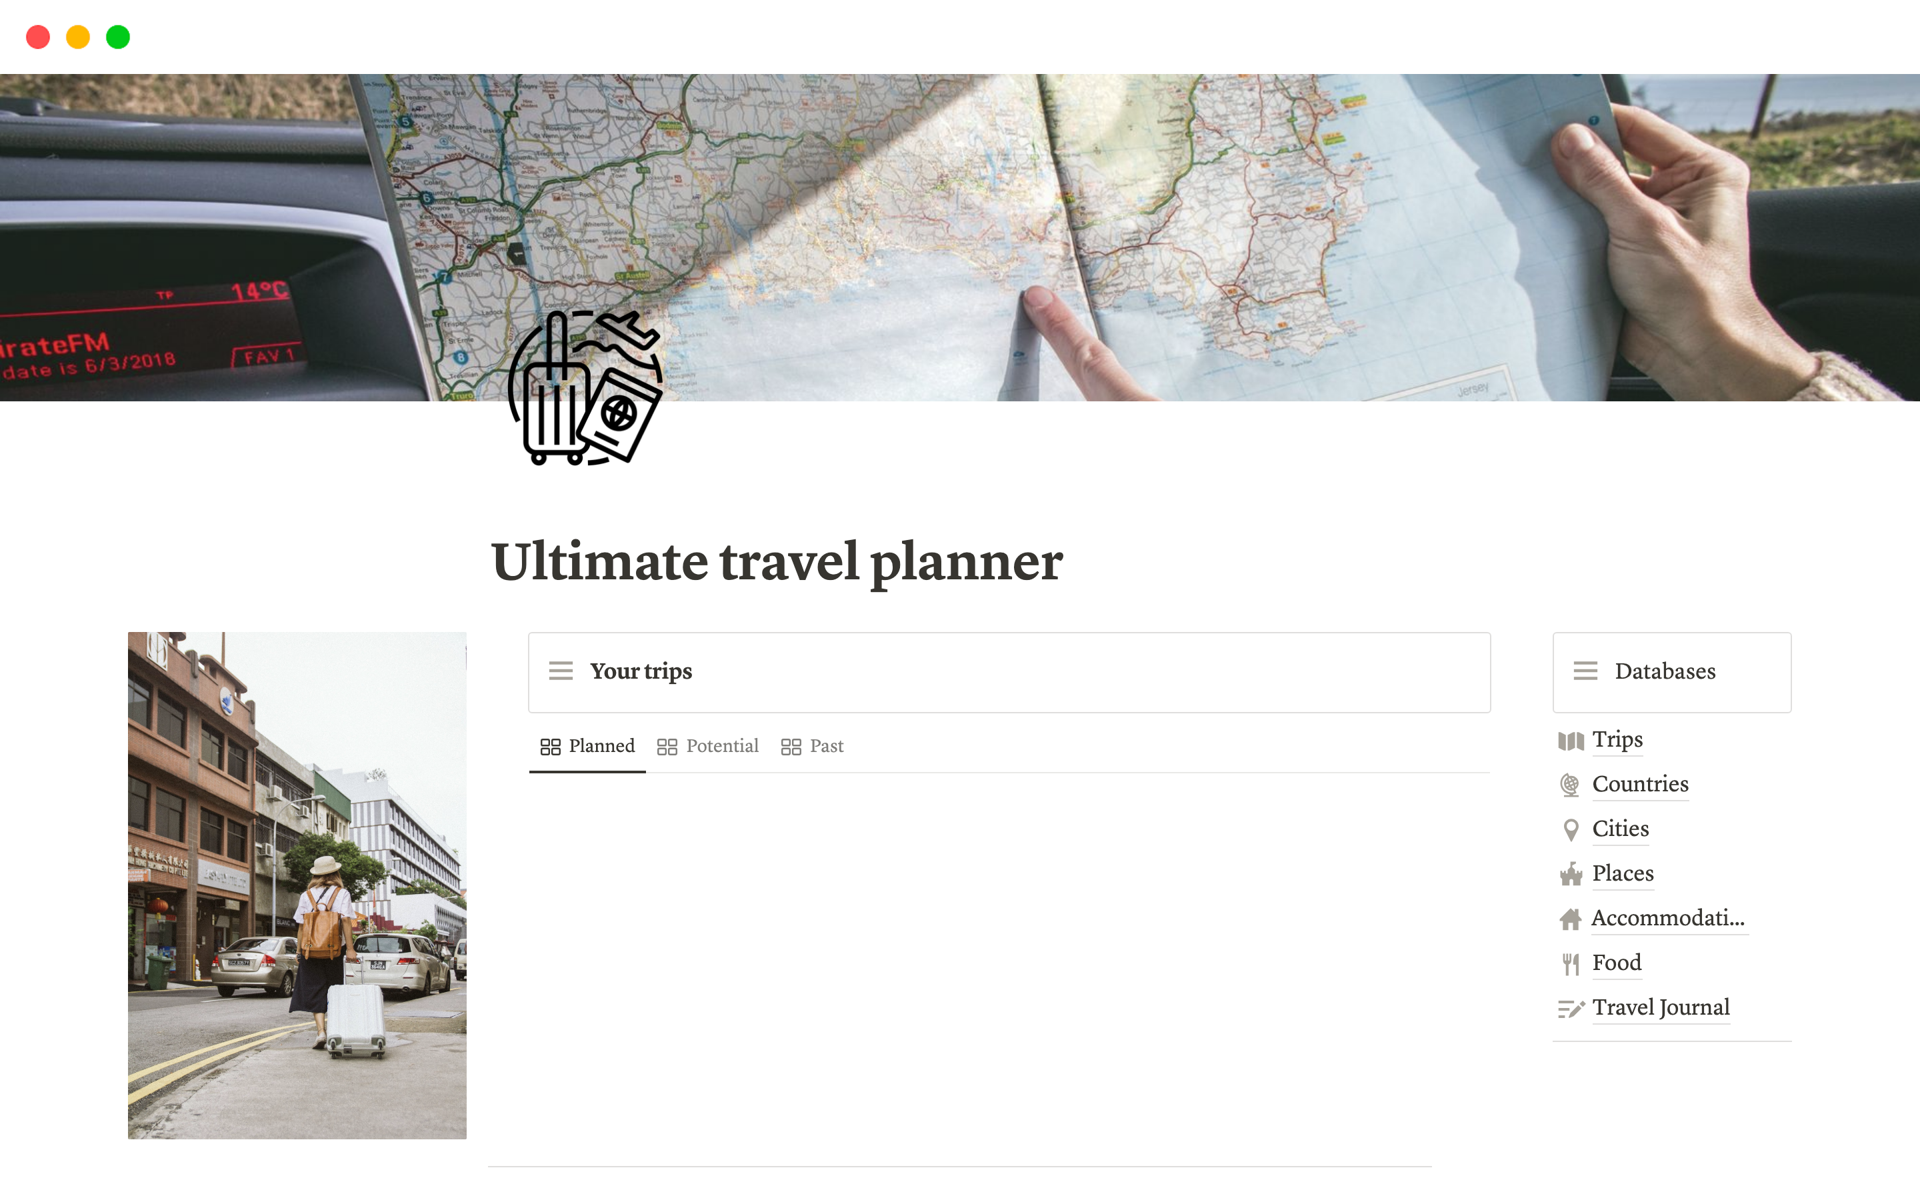 This template is your travel companion, offering an all-in-one solution to plan, track, and cherish your trips.